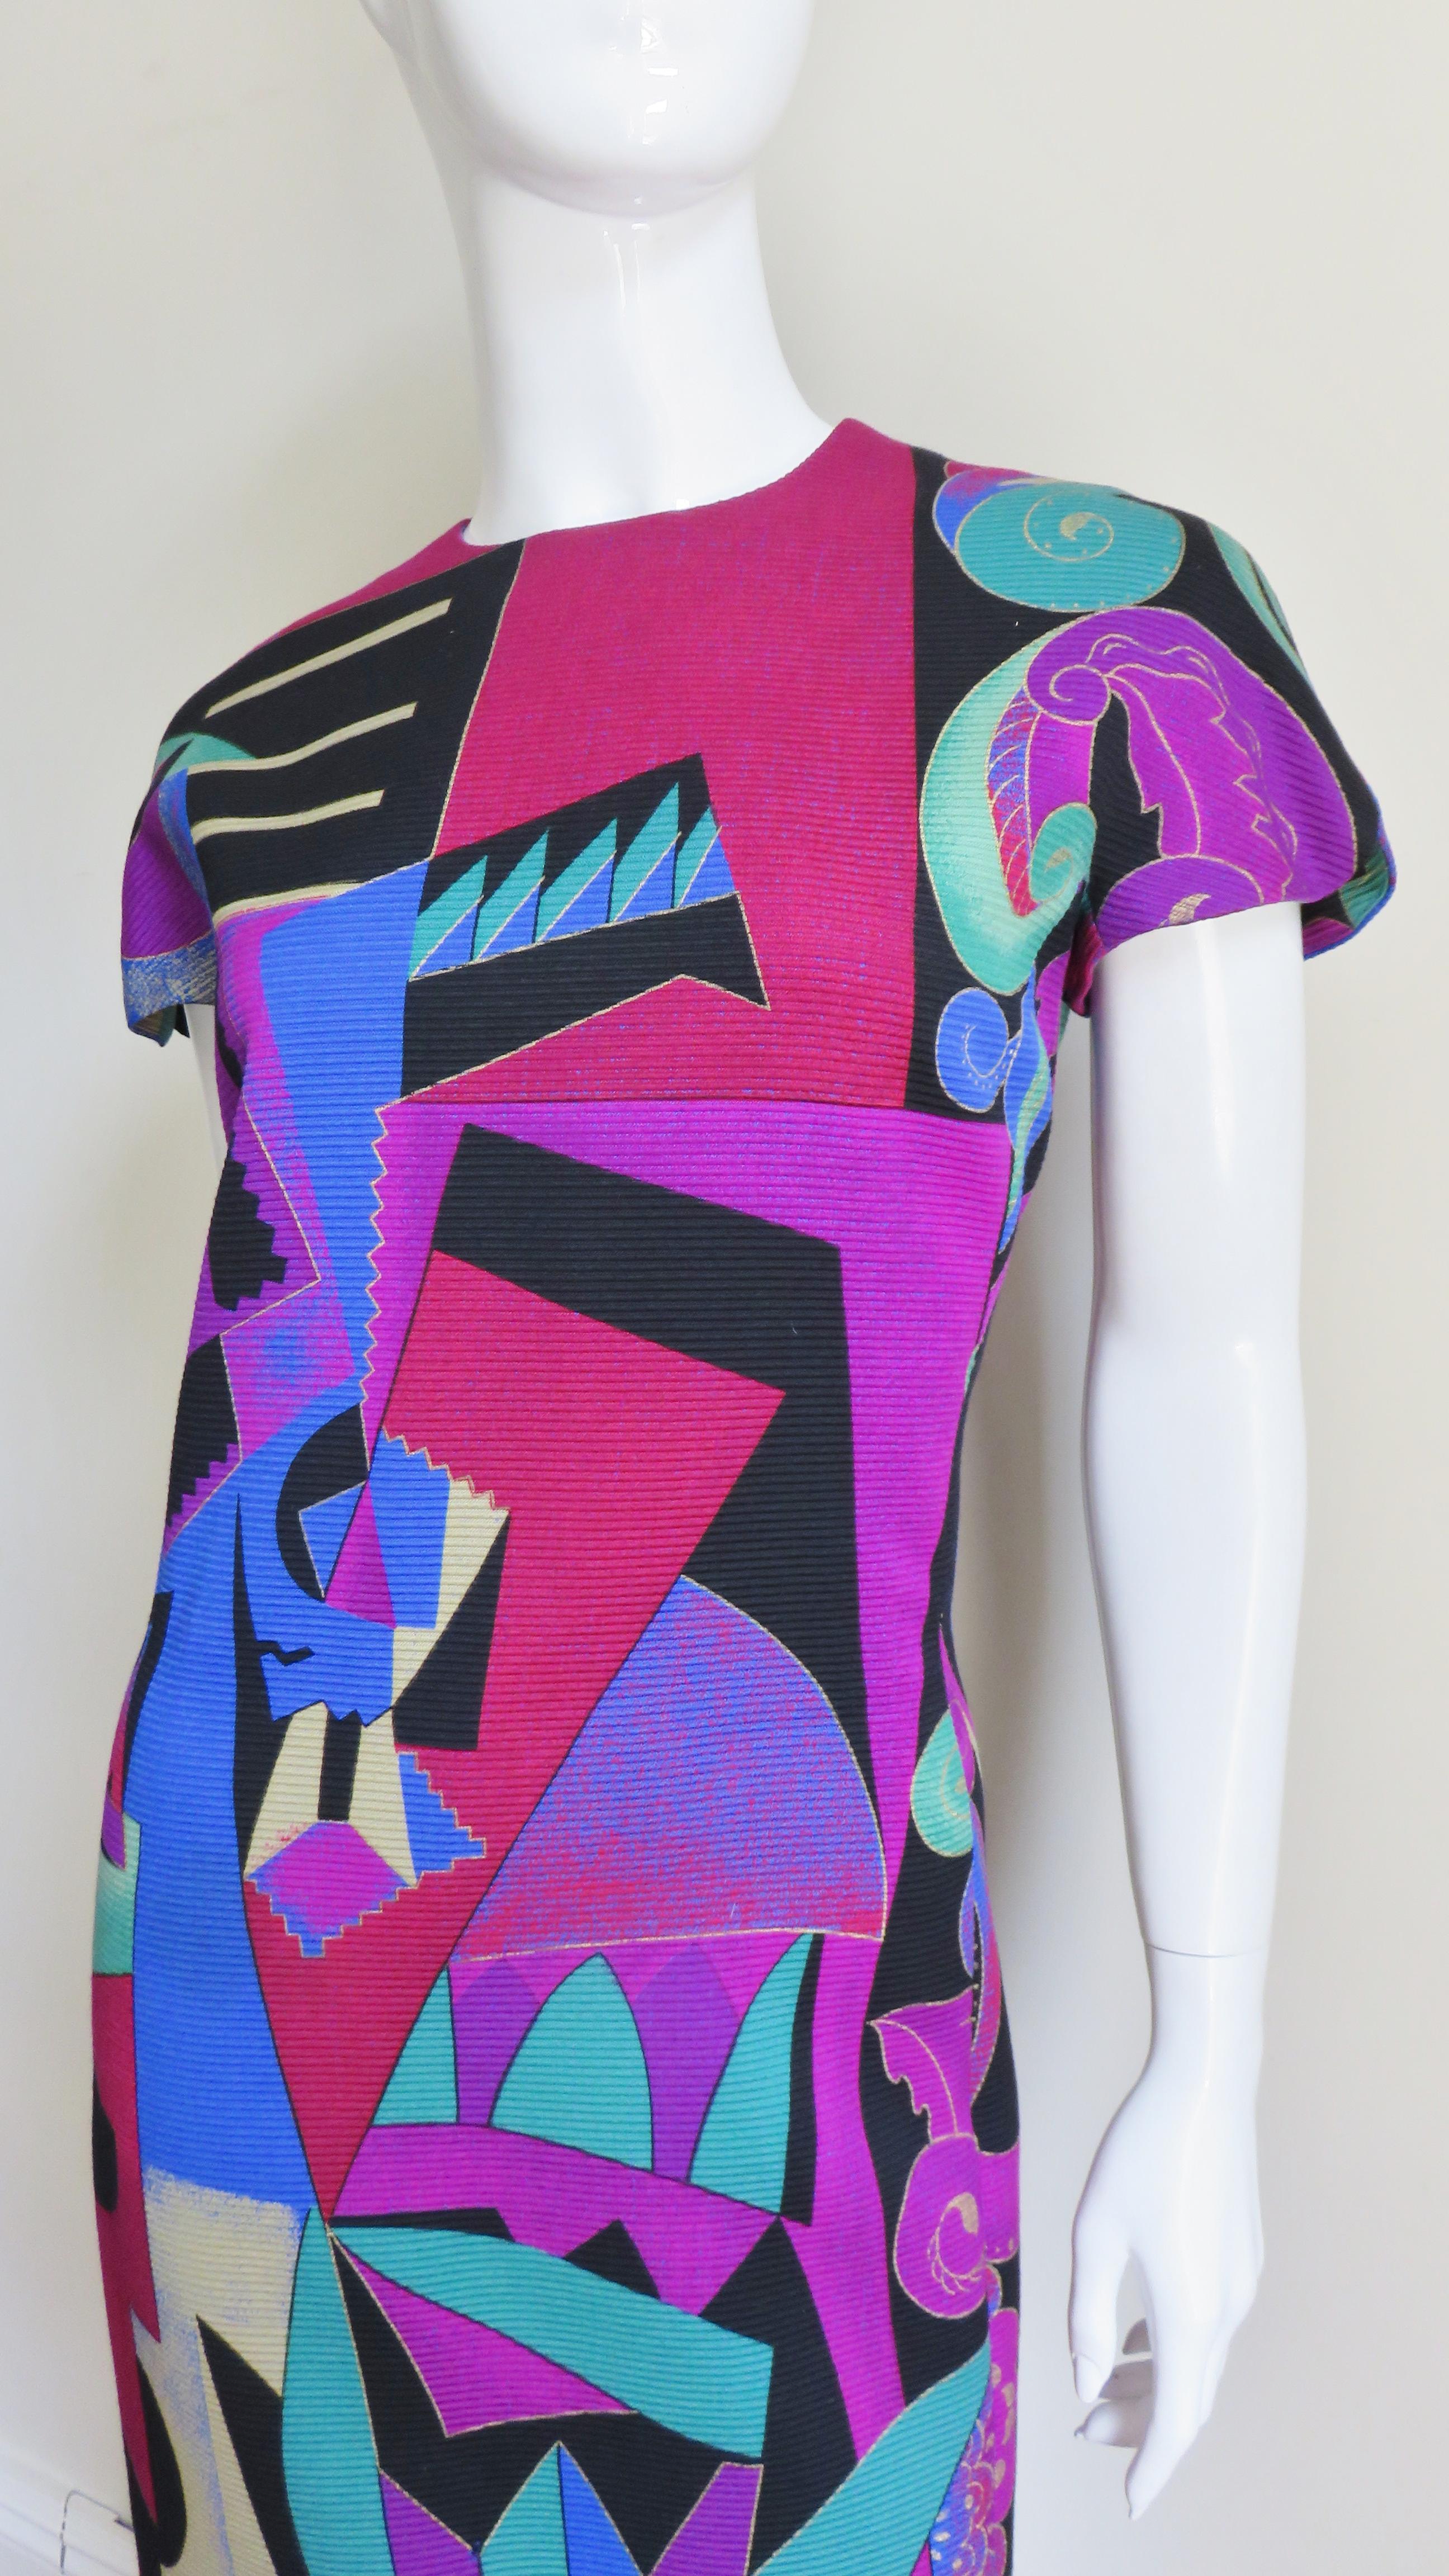 Gianni Versace Graffiti Dress and Jacket A/W 1991 In Good Condition For Sale In Water Mill, NY